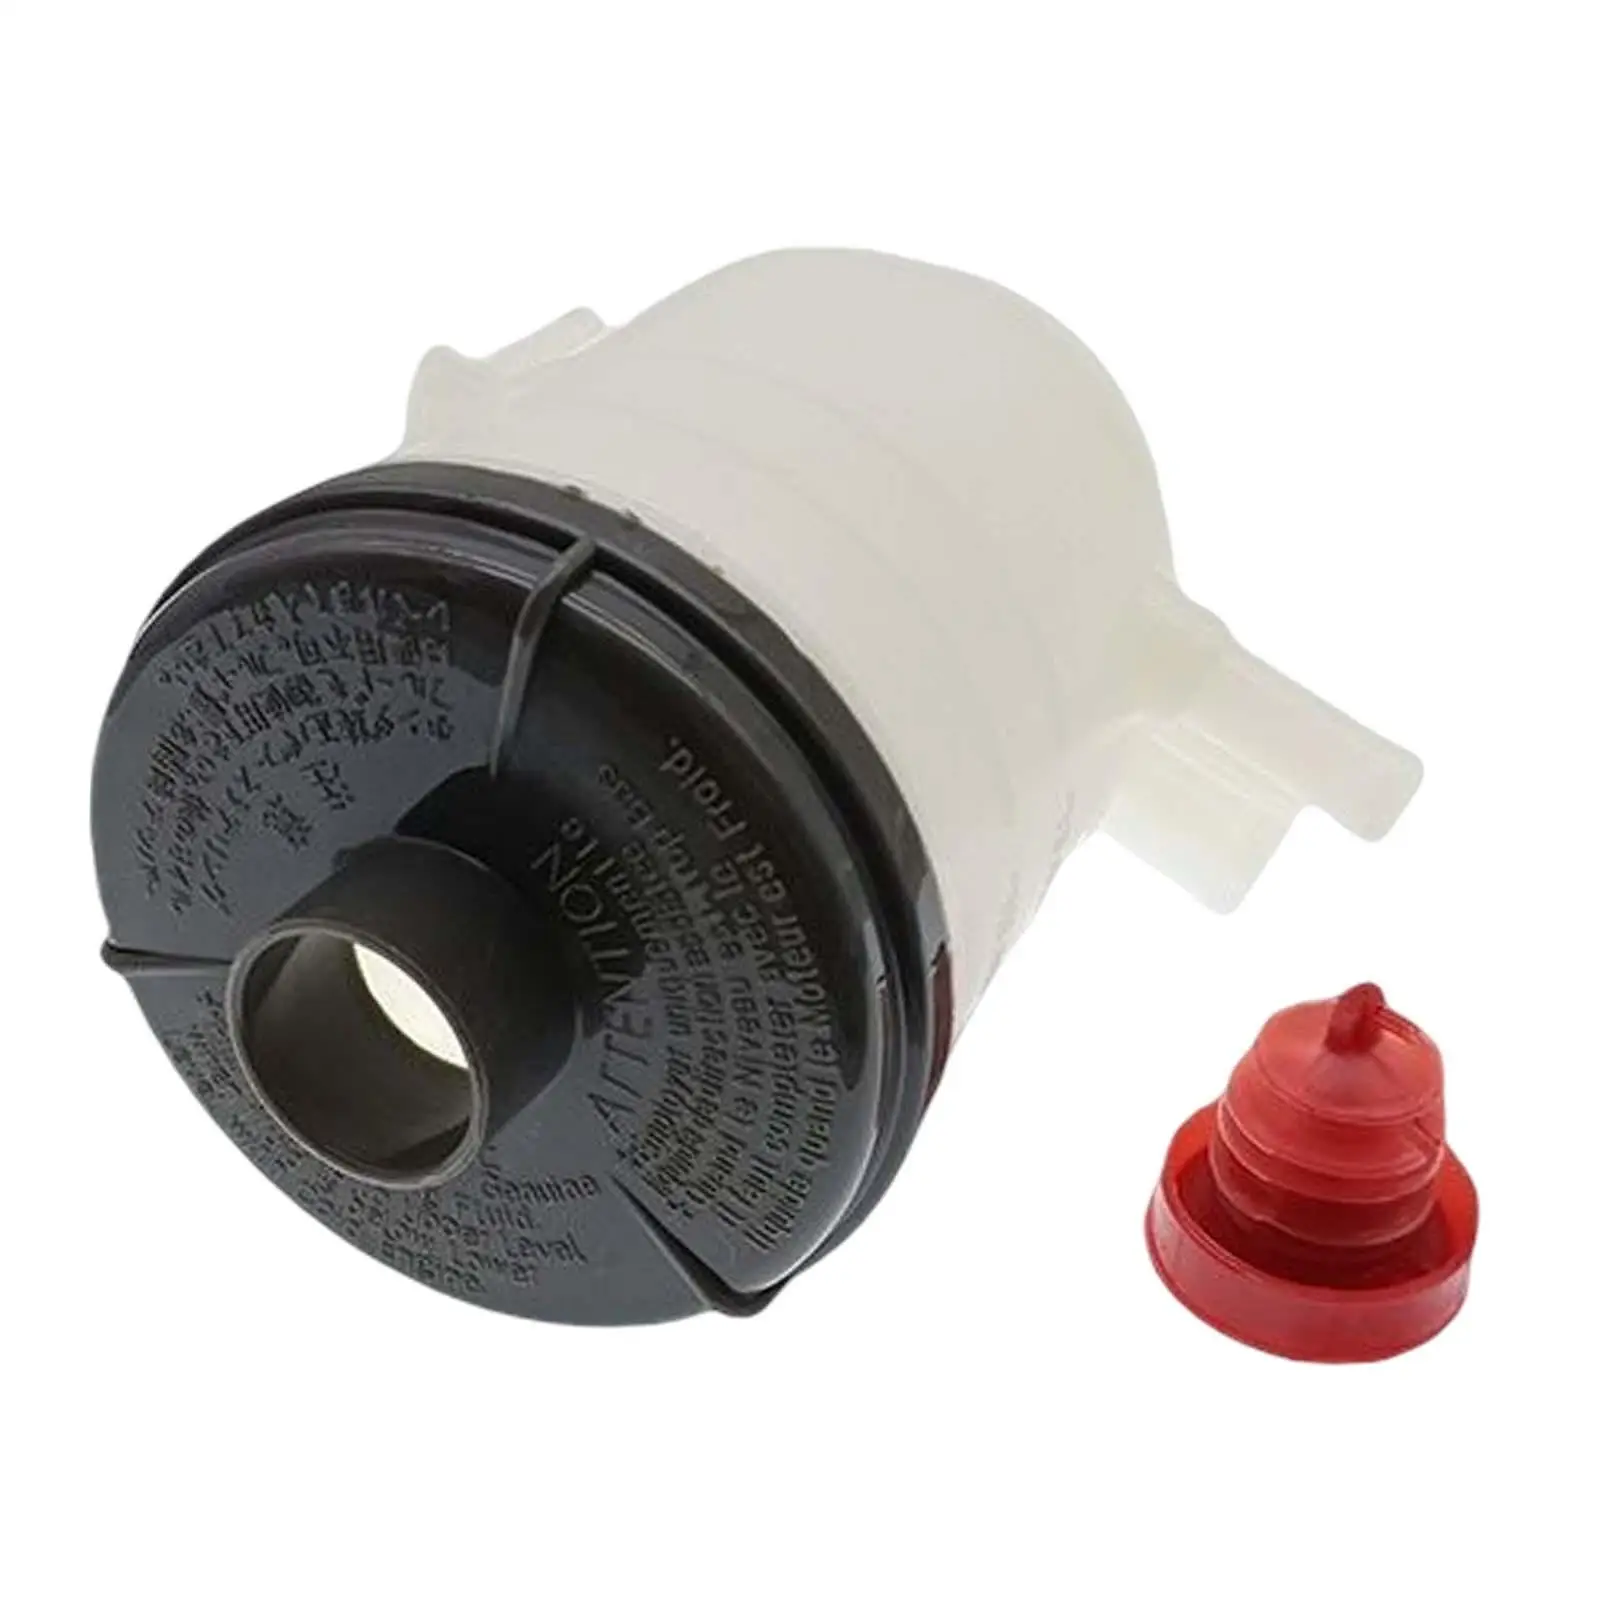 Booster Pump Oil Cup Portable Easy to Install Parts Power Steering Pump Reservoir for Honda Accord 98-02